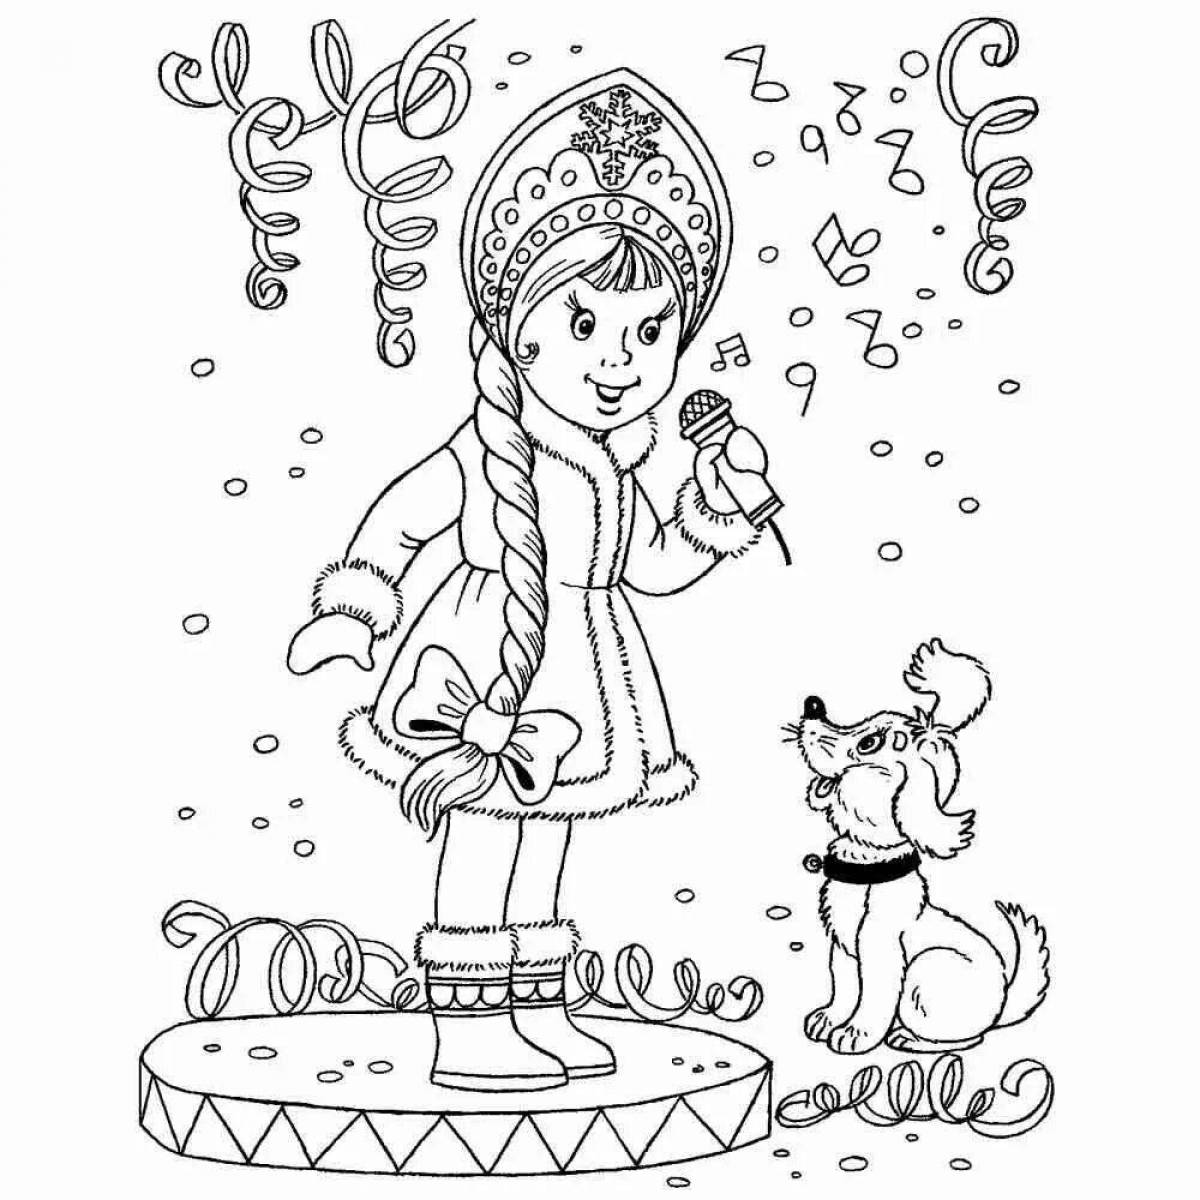 Wonderful Snow Maiden coloring book